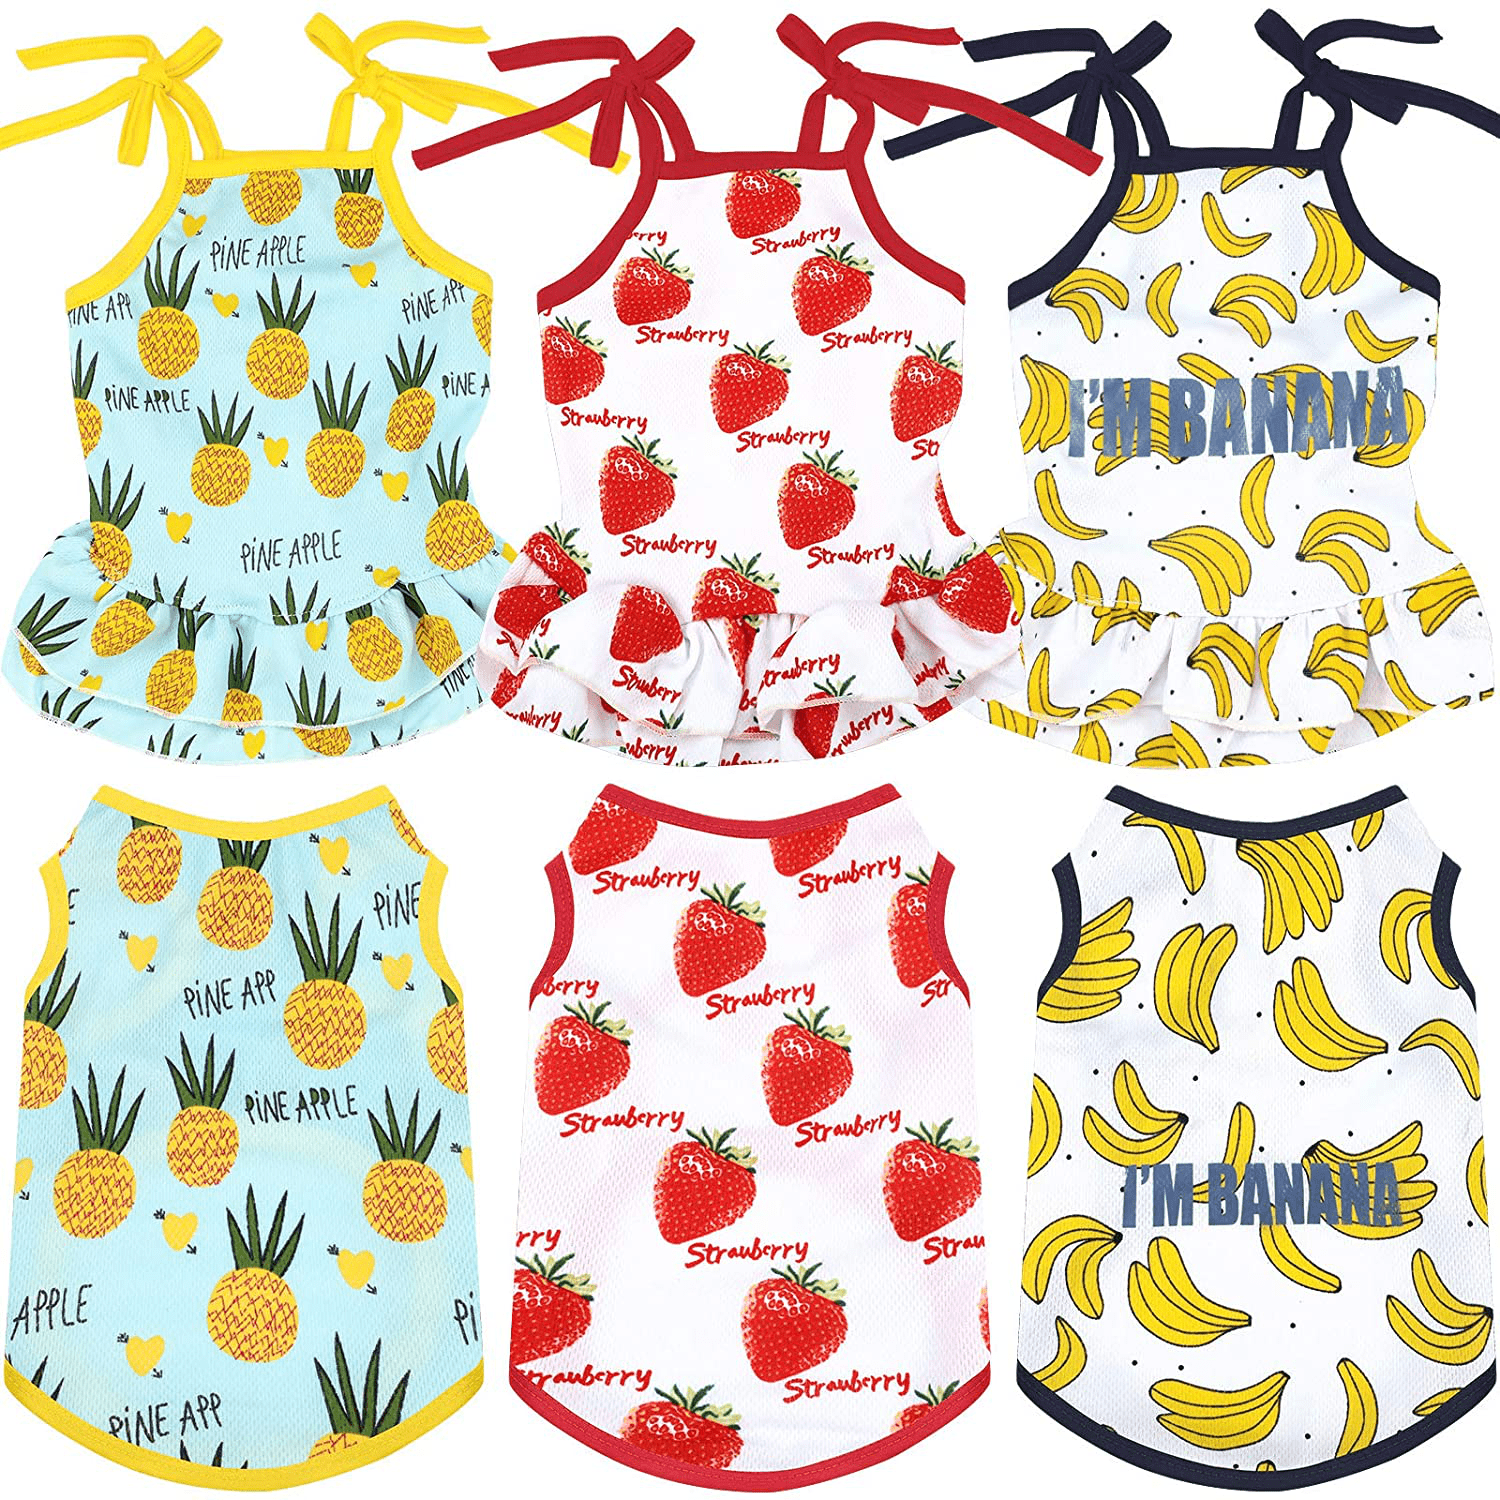 2 Pieces Dog Dresses for Small Dogs Cute Girl Female Dog Clothes